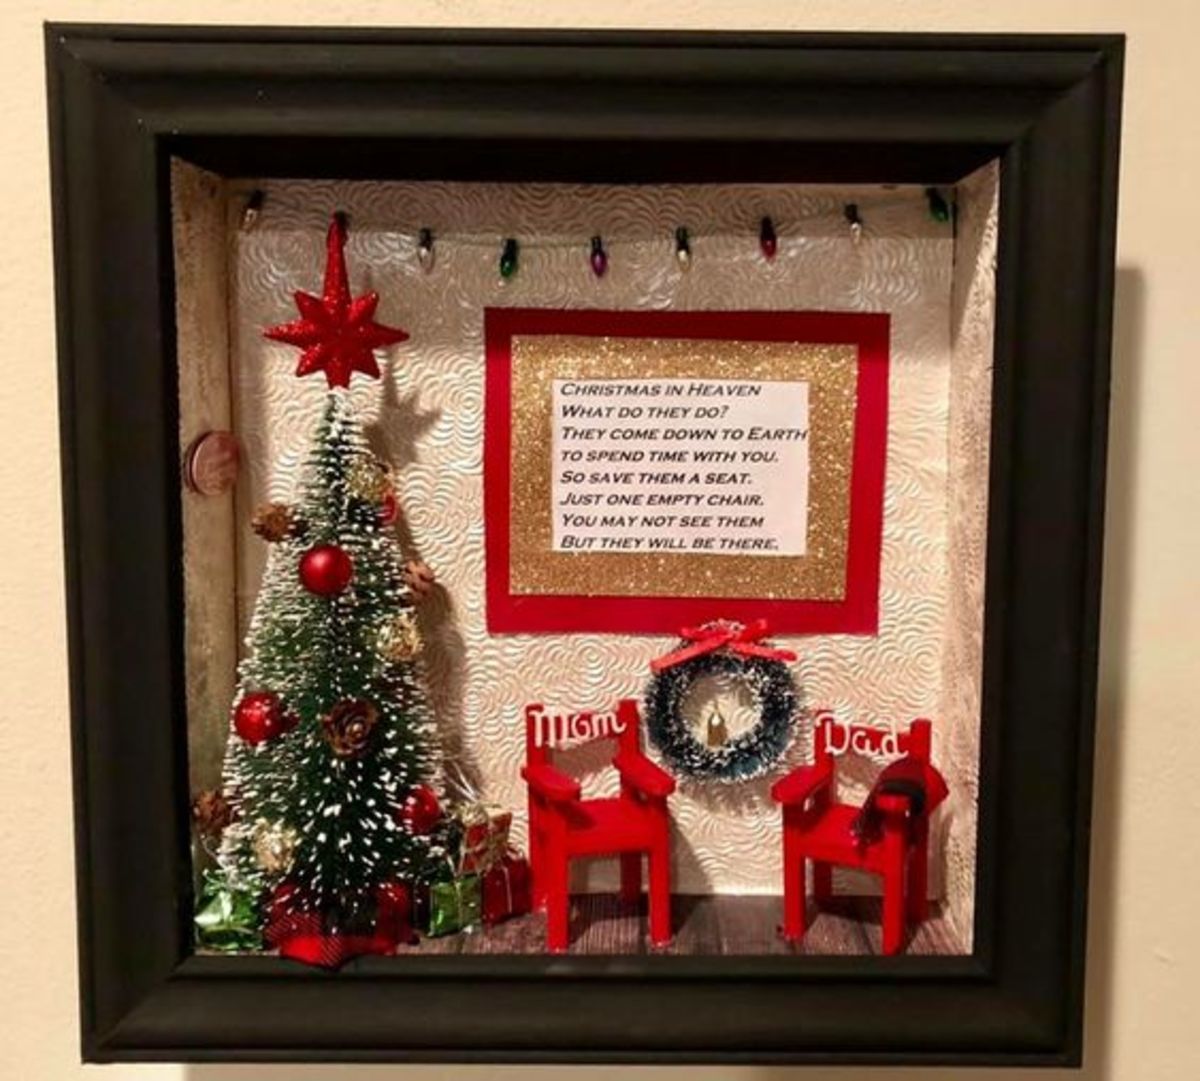 Here's another version of the touching memorial shadow box.